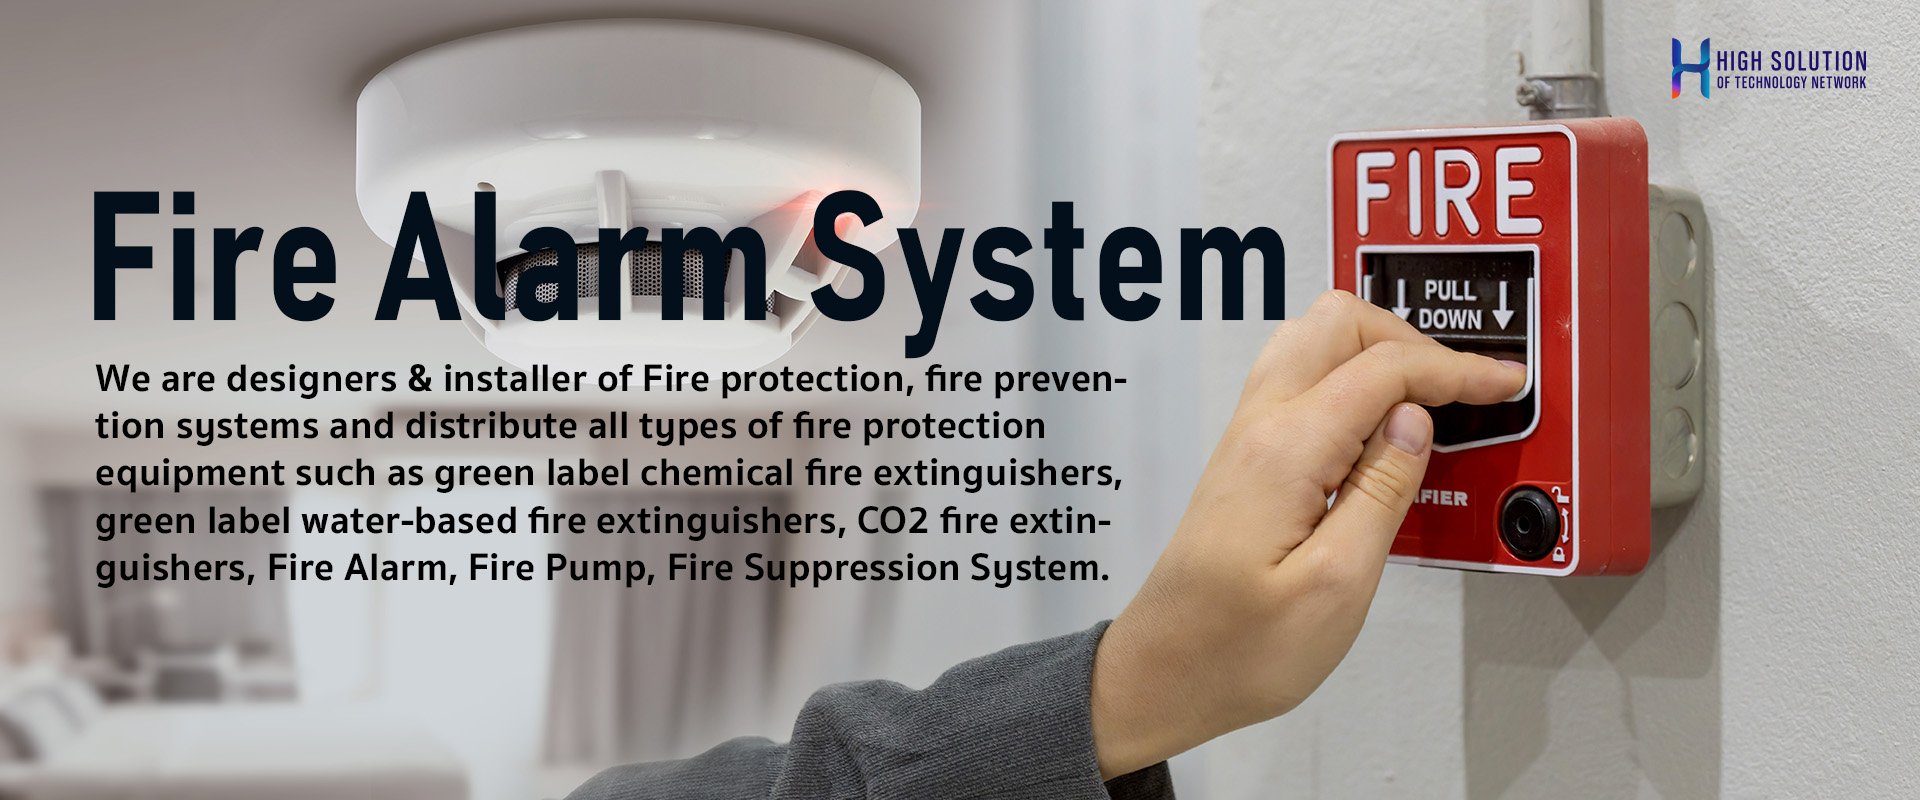 Fire_Alarm_System_By_highsolution